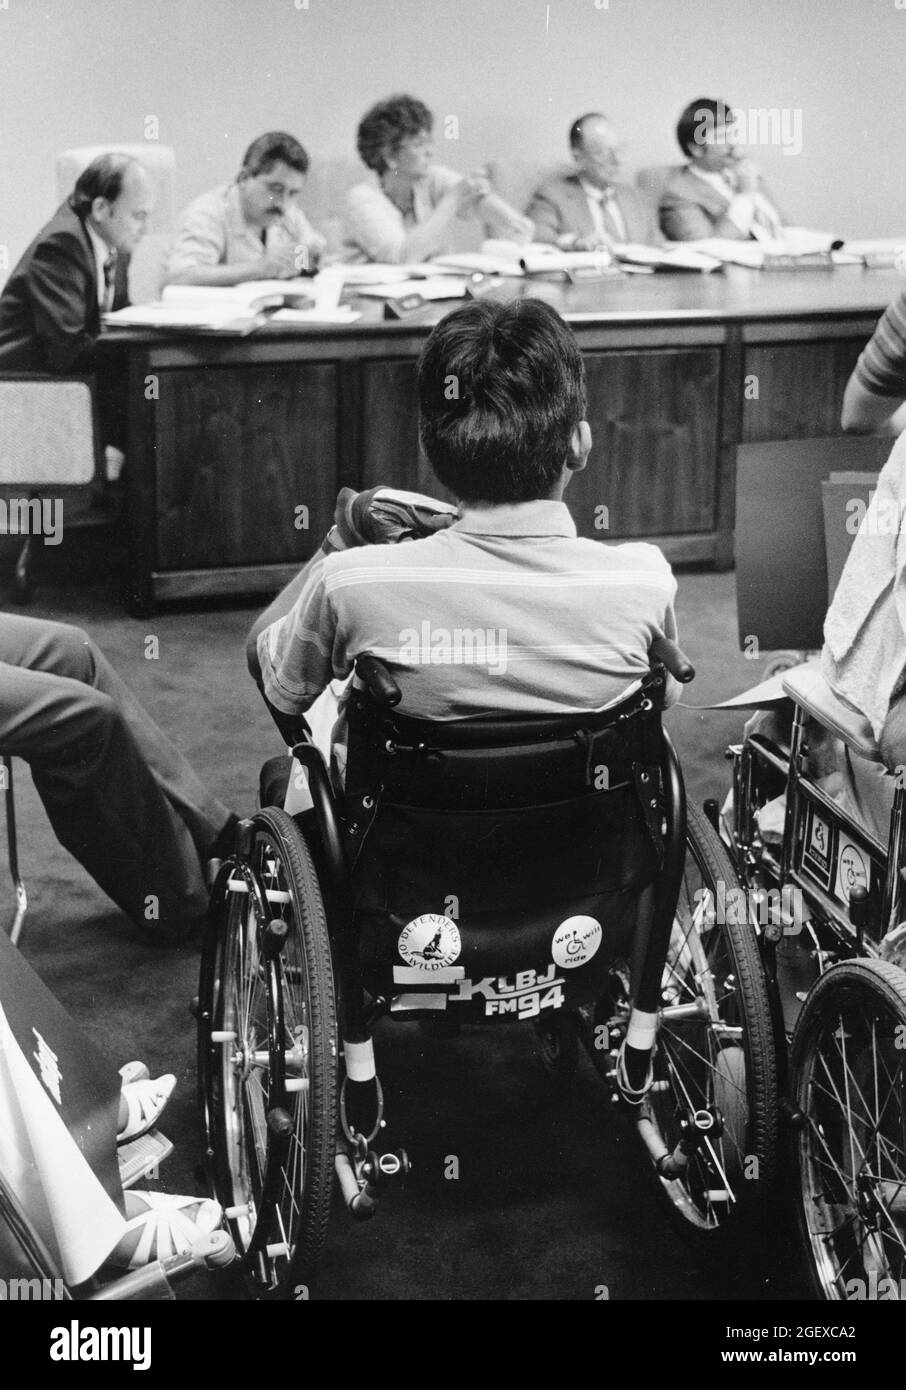 Austin Texas USA, circa 1990: Handicapped citizens in wheelchairs attend meeting of city transportation board to advocate for accessibility. Stock Photo